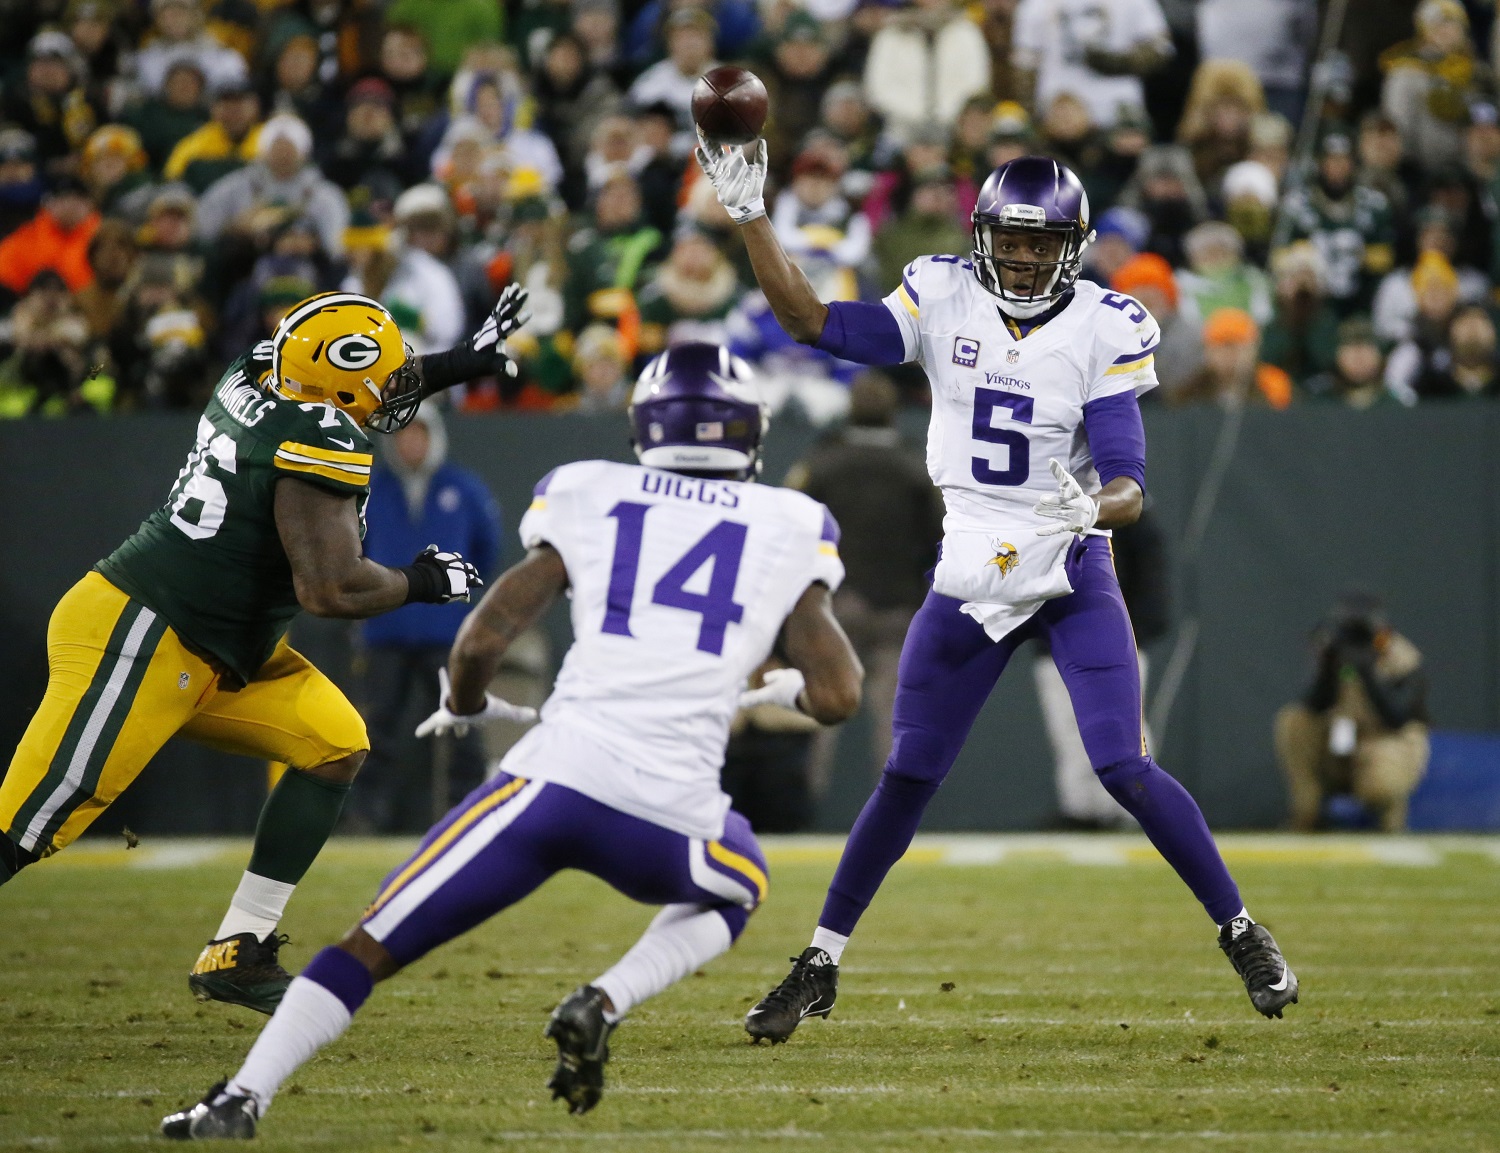 Minnesota Vikings' Teddy Bridgewater throws during the first half an NFL football game against the Green Bay Packers Sunday, Jan. 3, 2016, in Green Bay, Wis. (AP Photo/Mike Roemer)